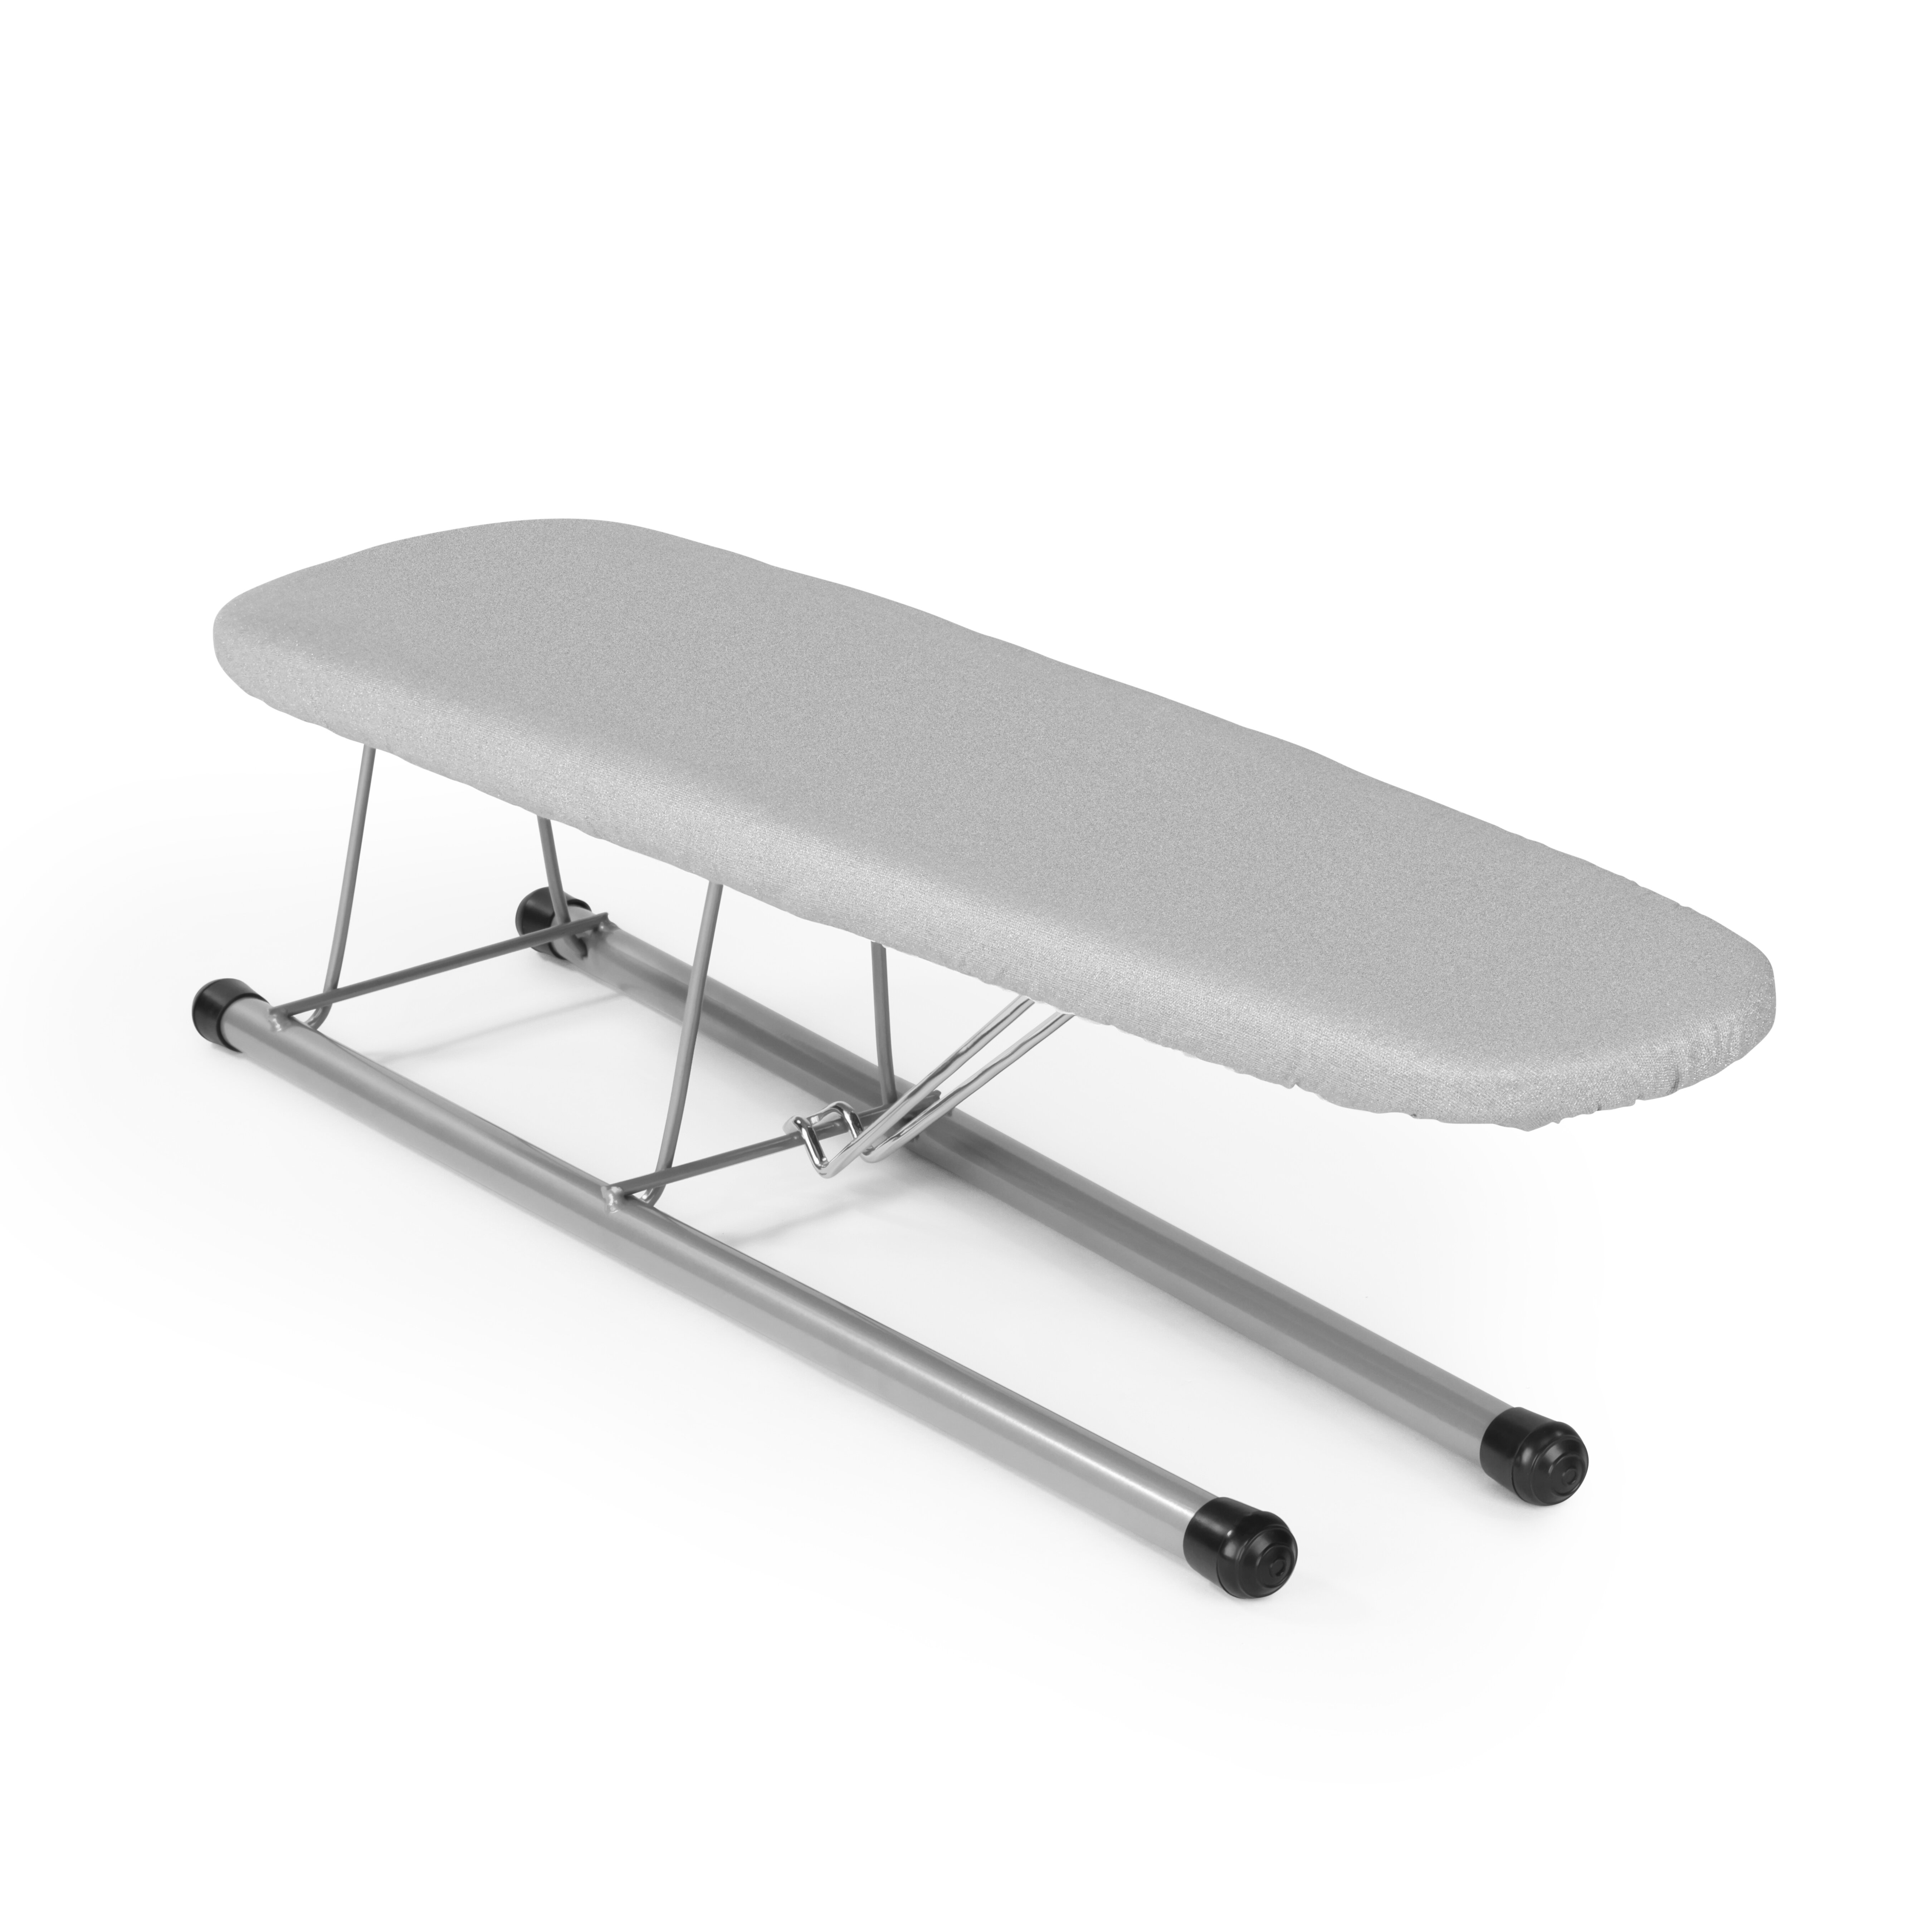 Household Essentials Tabletop Ironing Board, Compact Ironing Board with  Iron Rest, Includes Door Hang, Perfect for Dorms and Small Spaces, 12 x  30